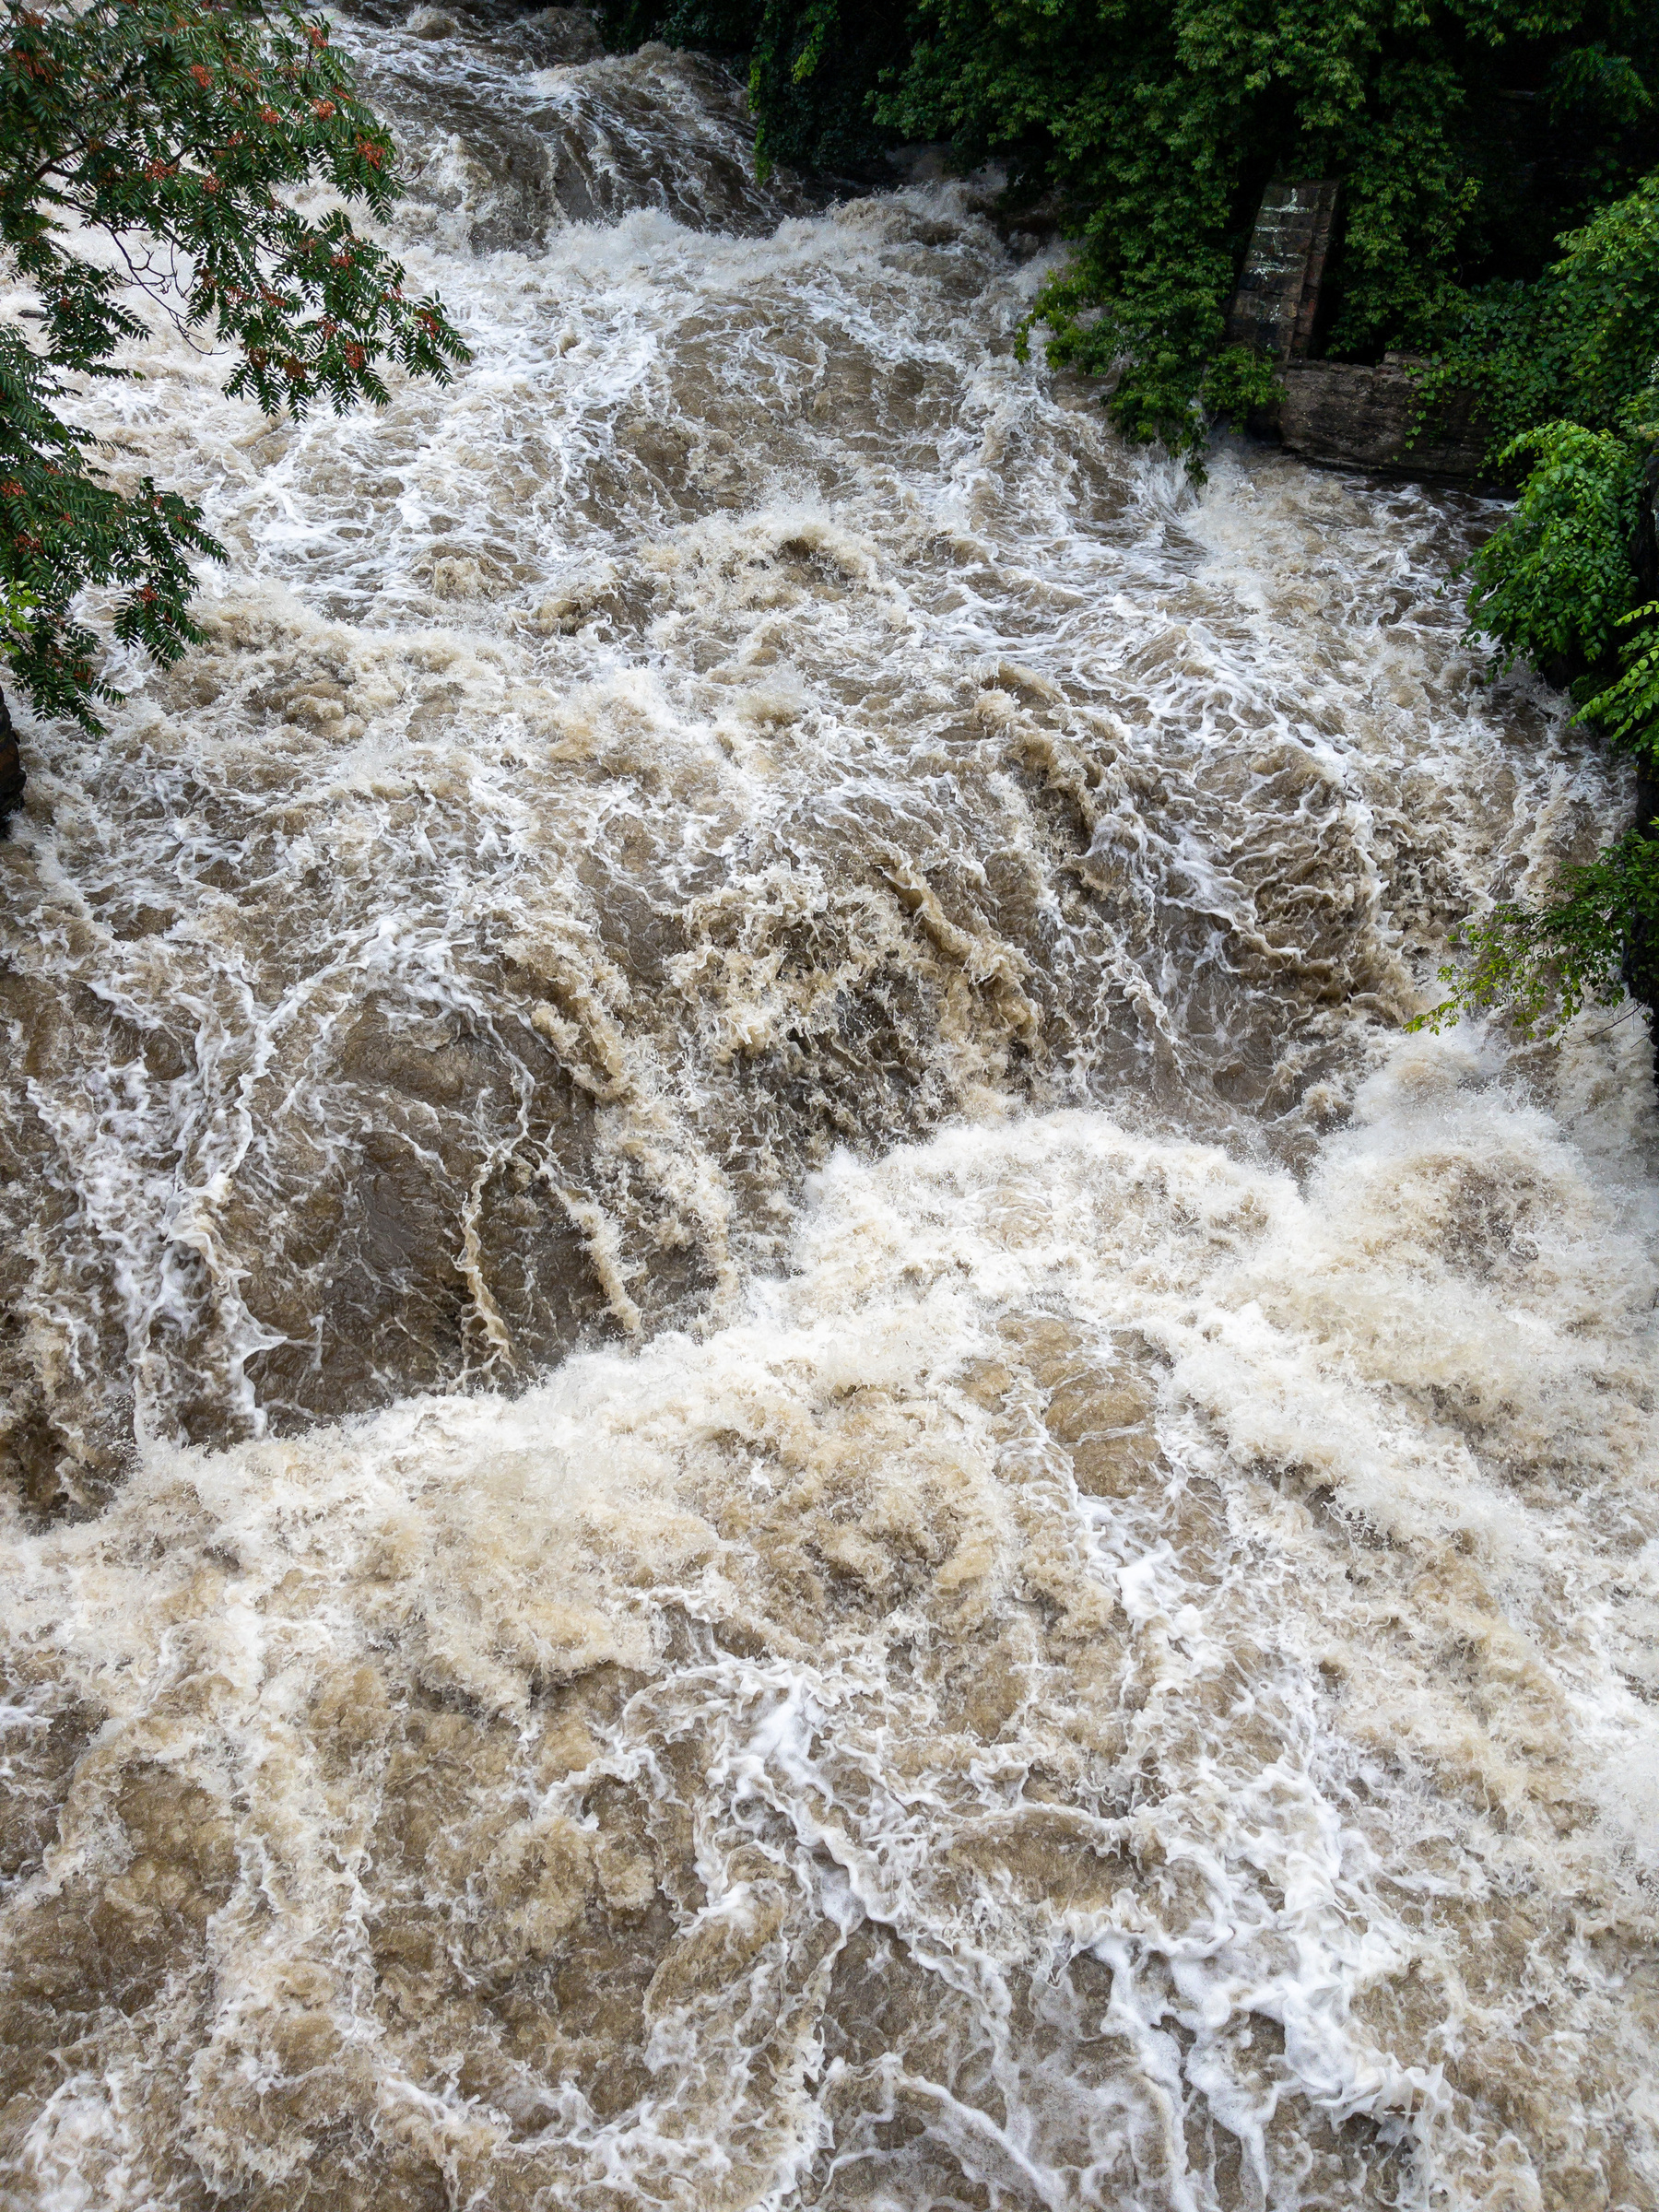 Tumbling, violent rapids in local stream after heavy rainfall.